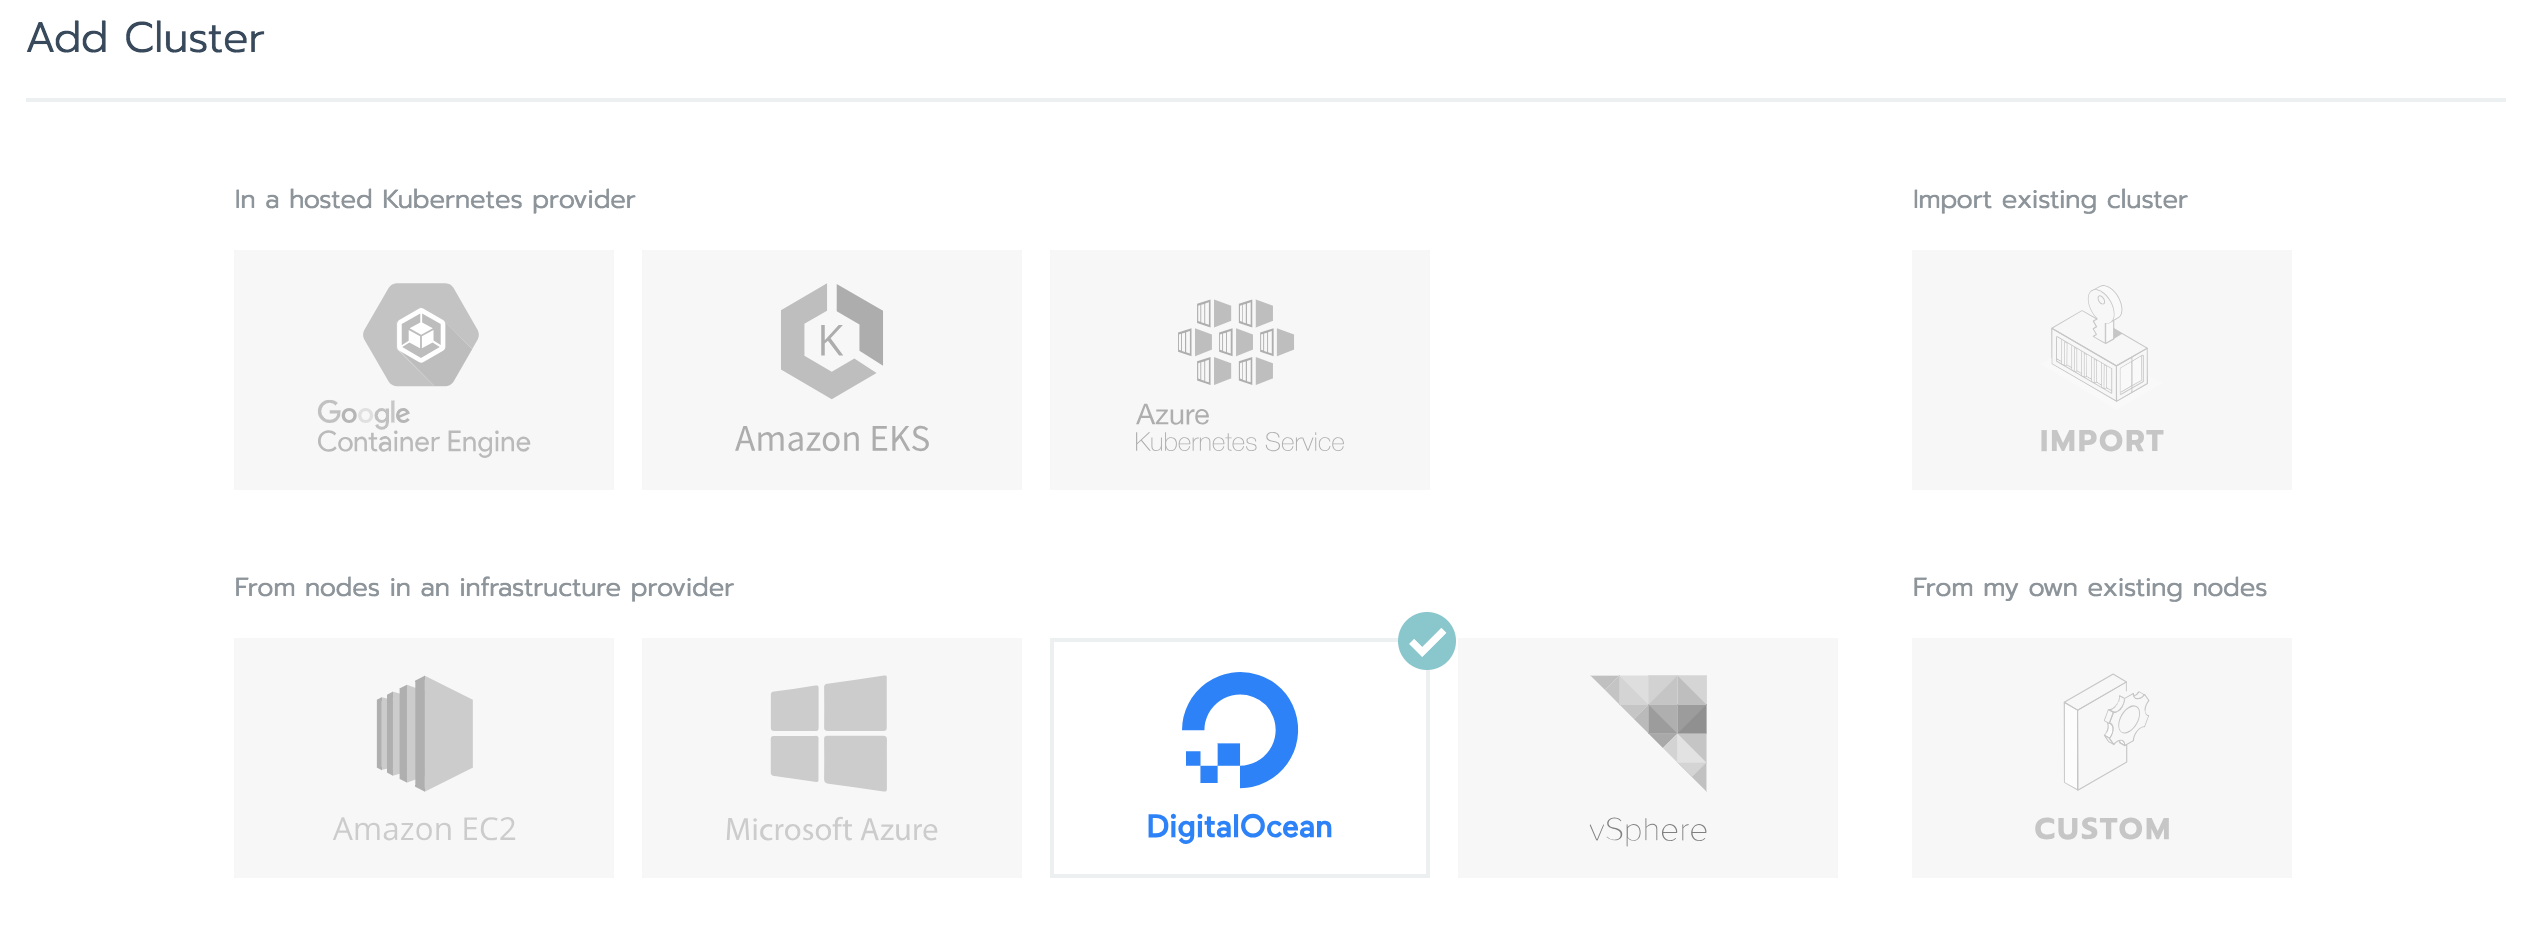 Select DigitalOcean from the listed infrastructure providers